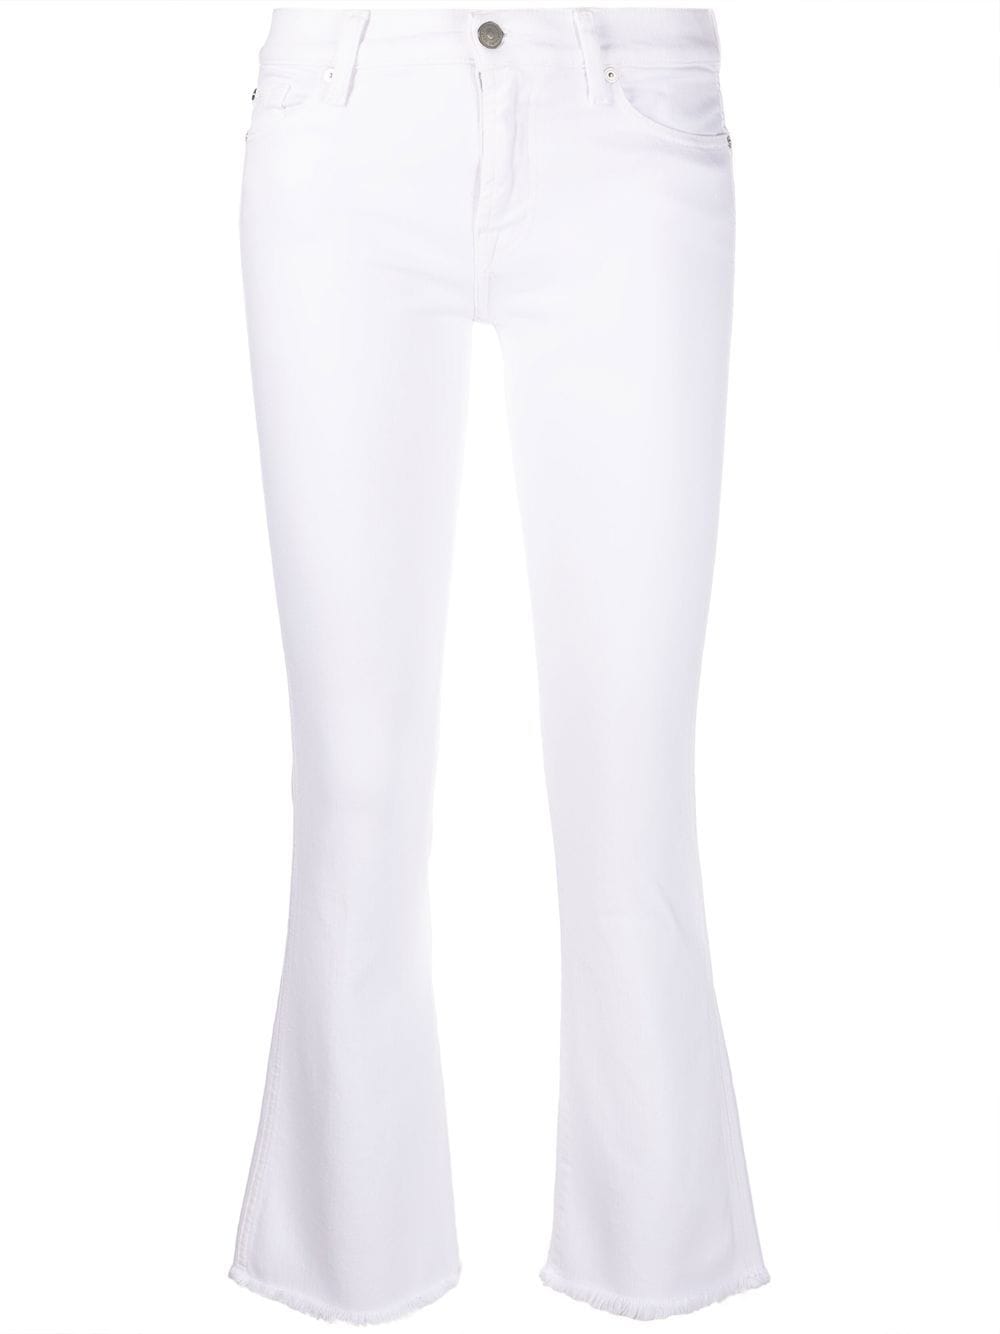 7 For All Mankind low-rise bootcut jeans - White von 7 For All Mankind